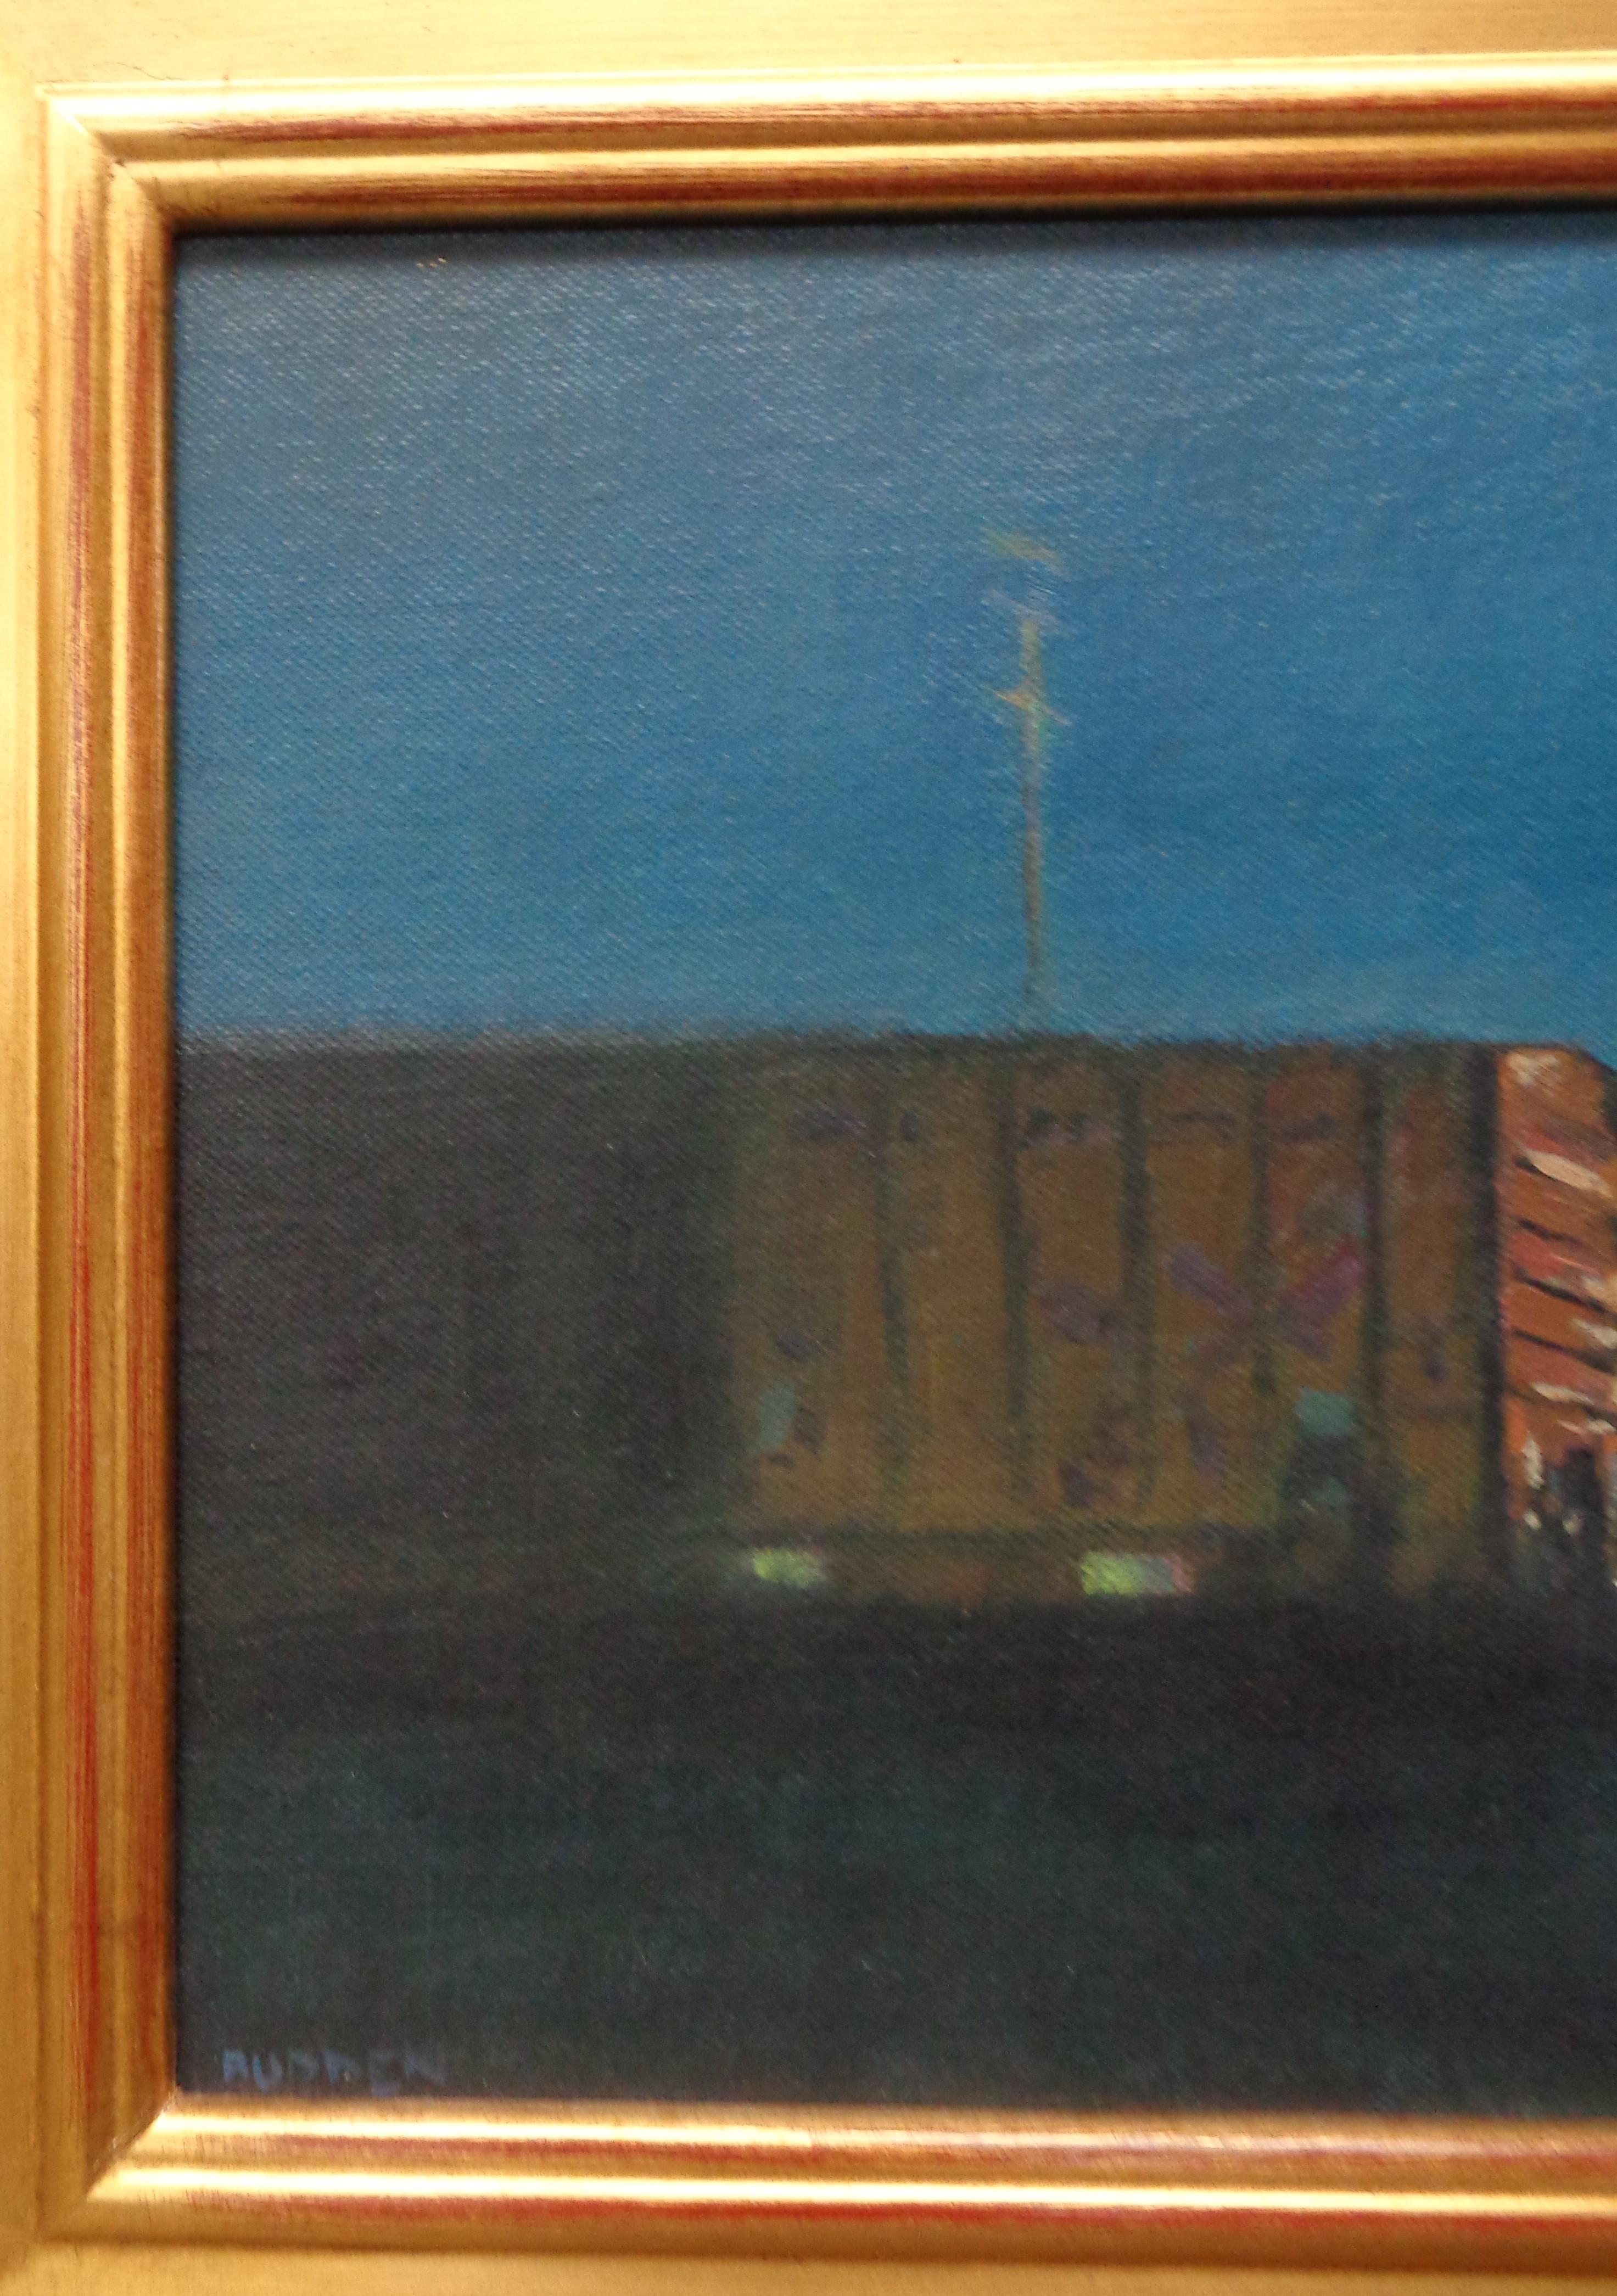  Impressionistic Train Night Landscape Painting Michael Budden Evening Boxcar 1